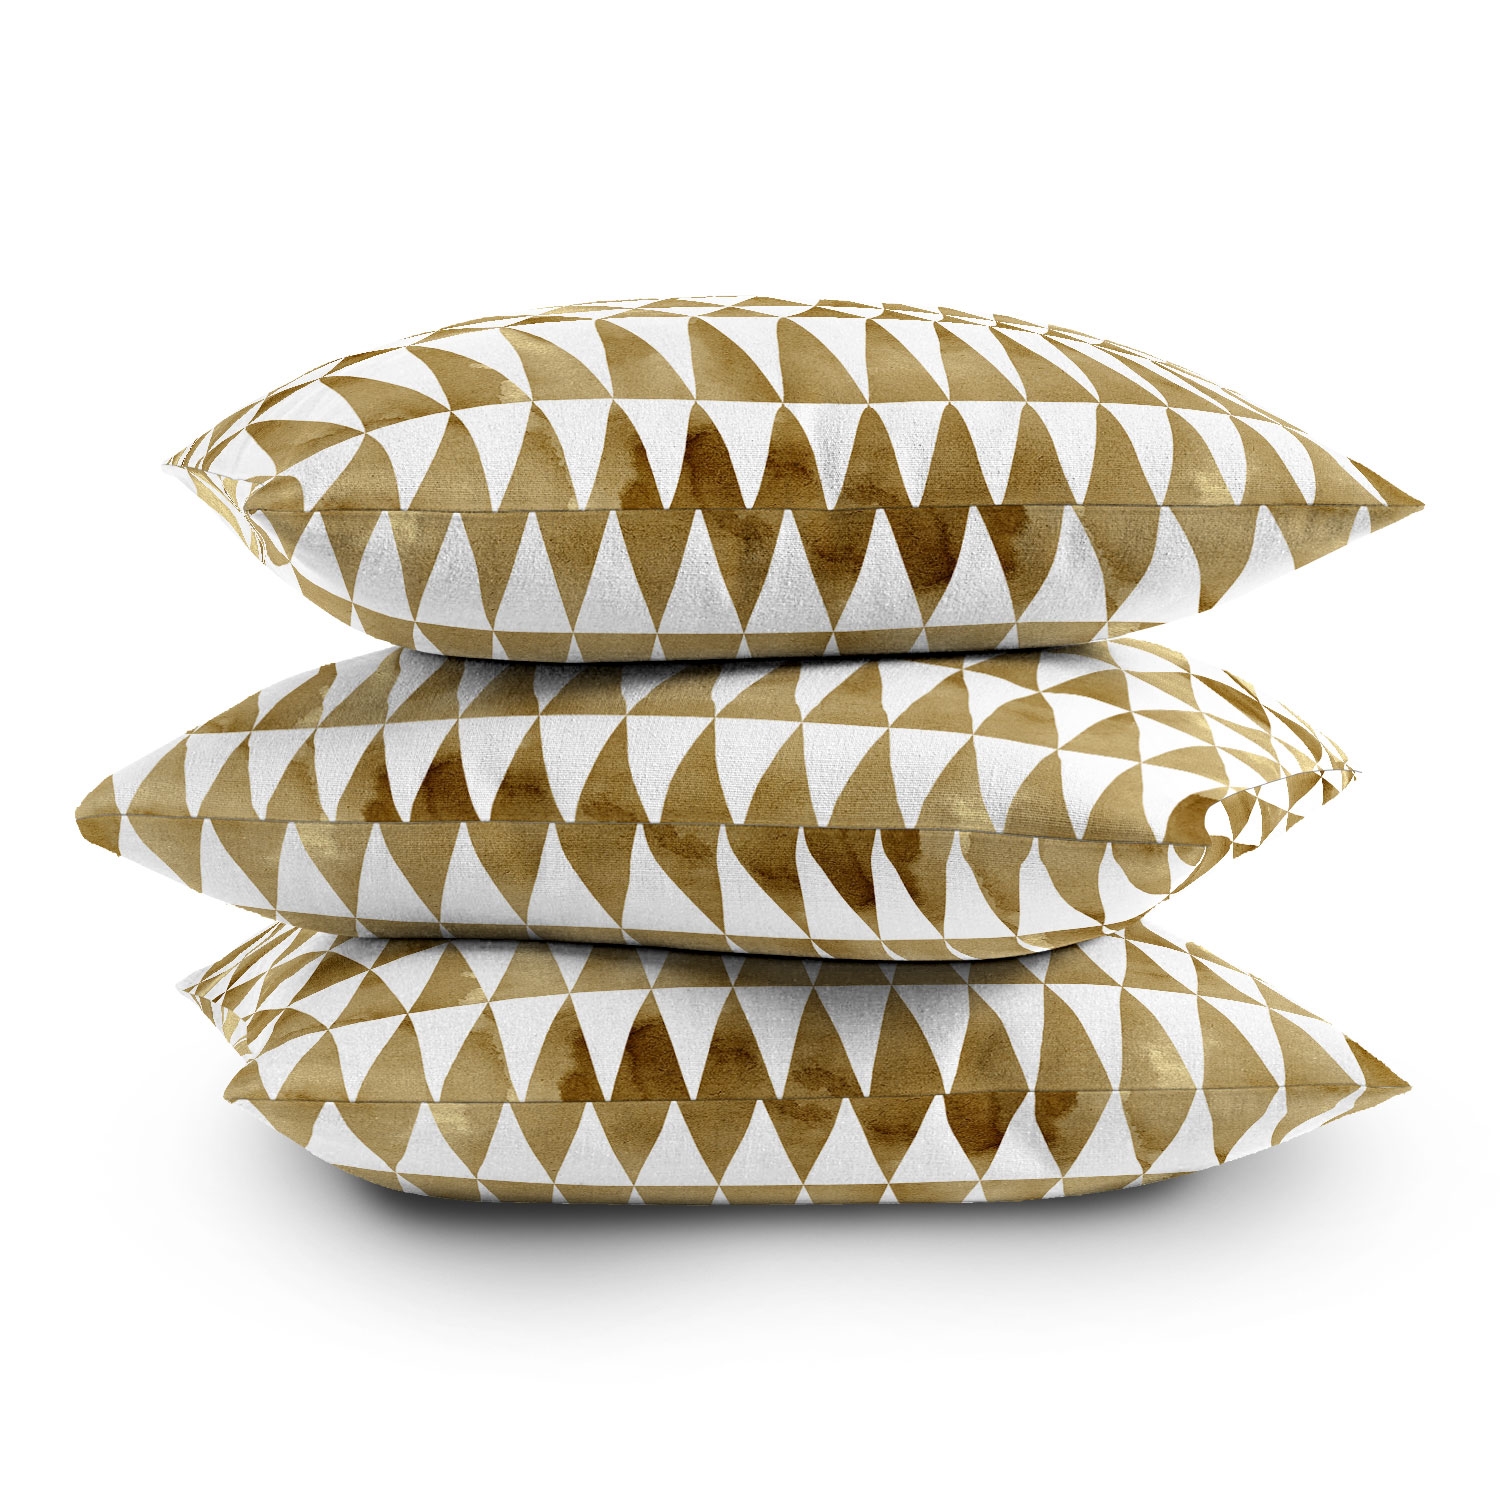 Triangle Pattern Gold by Georgiana Paraschiv - Outdoor Throw Pillow 18" x 18" - Image 3